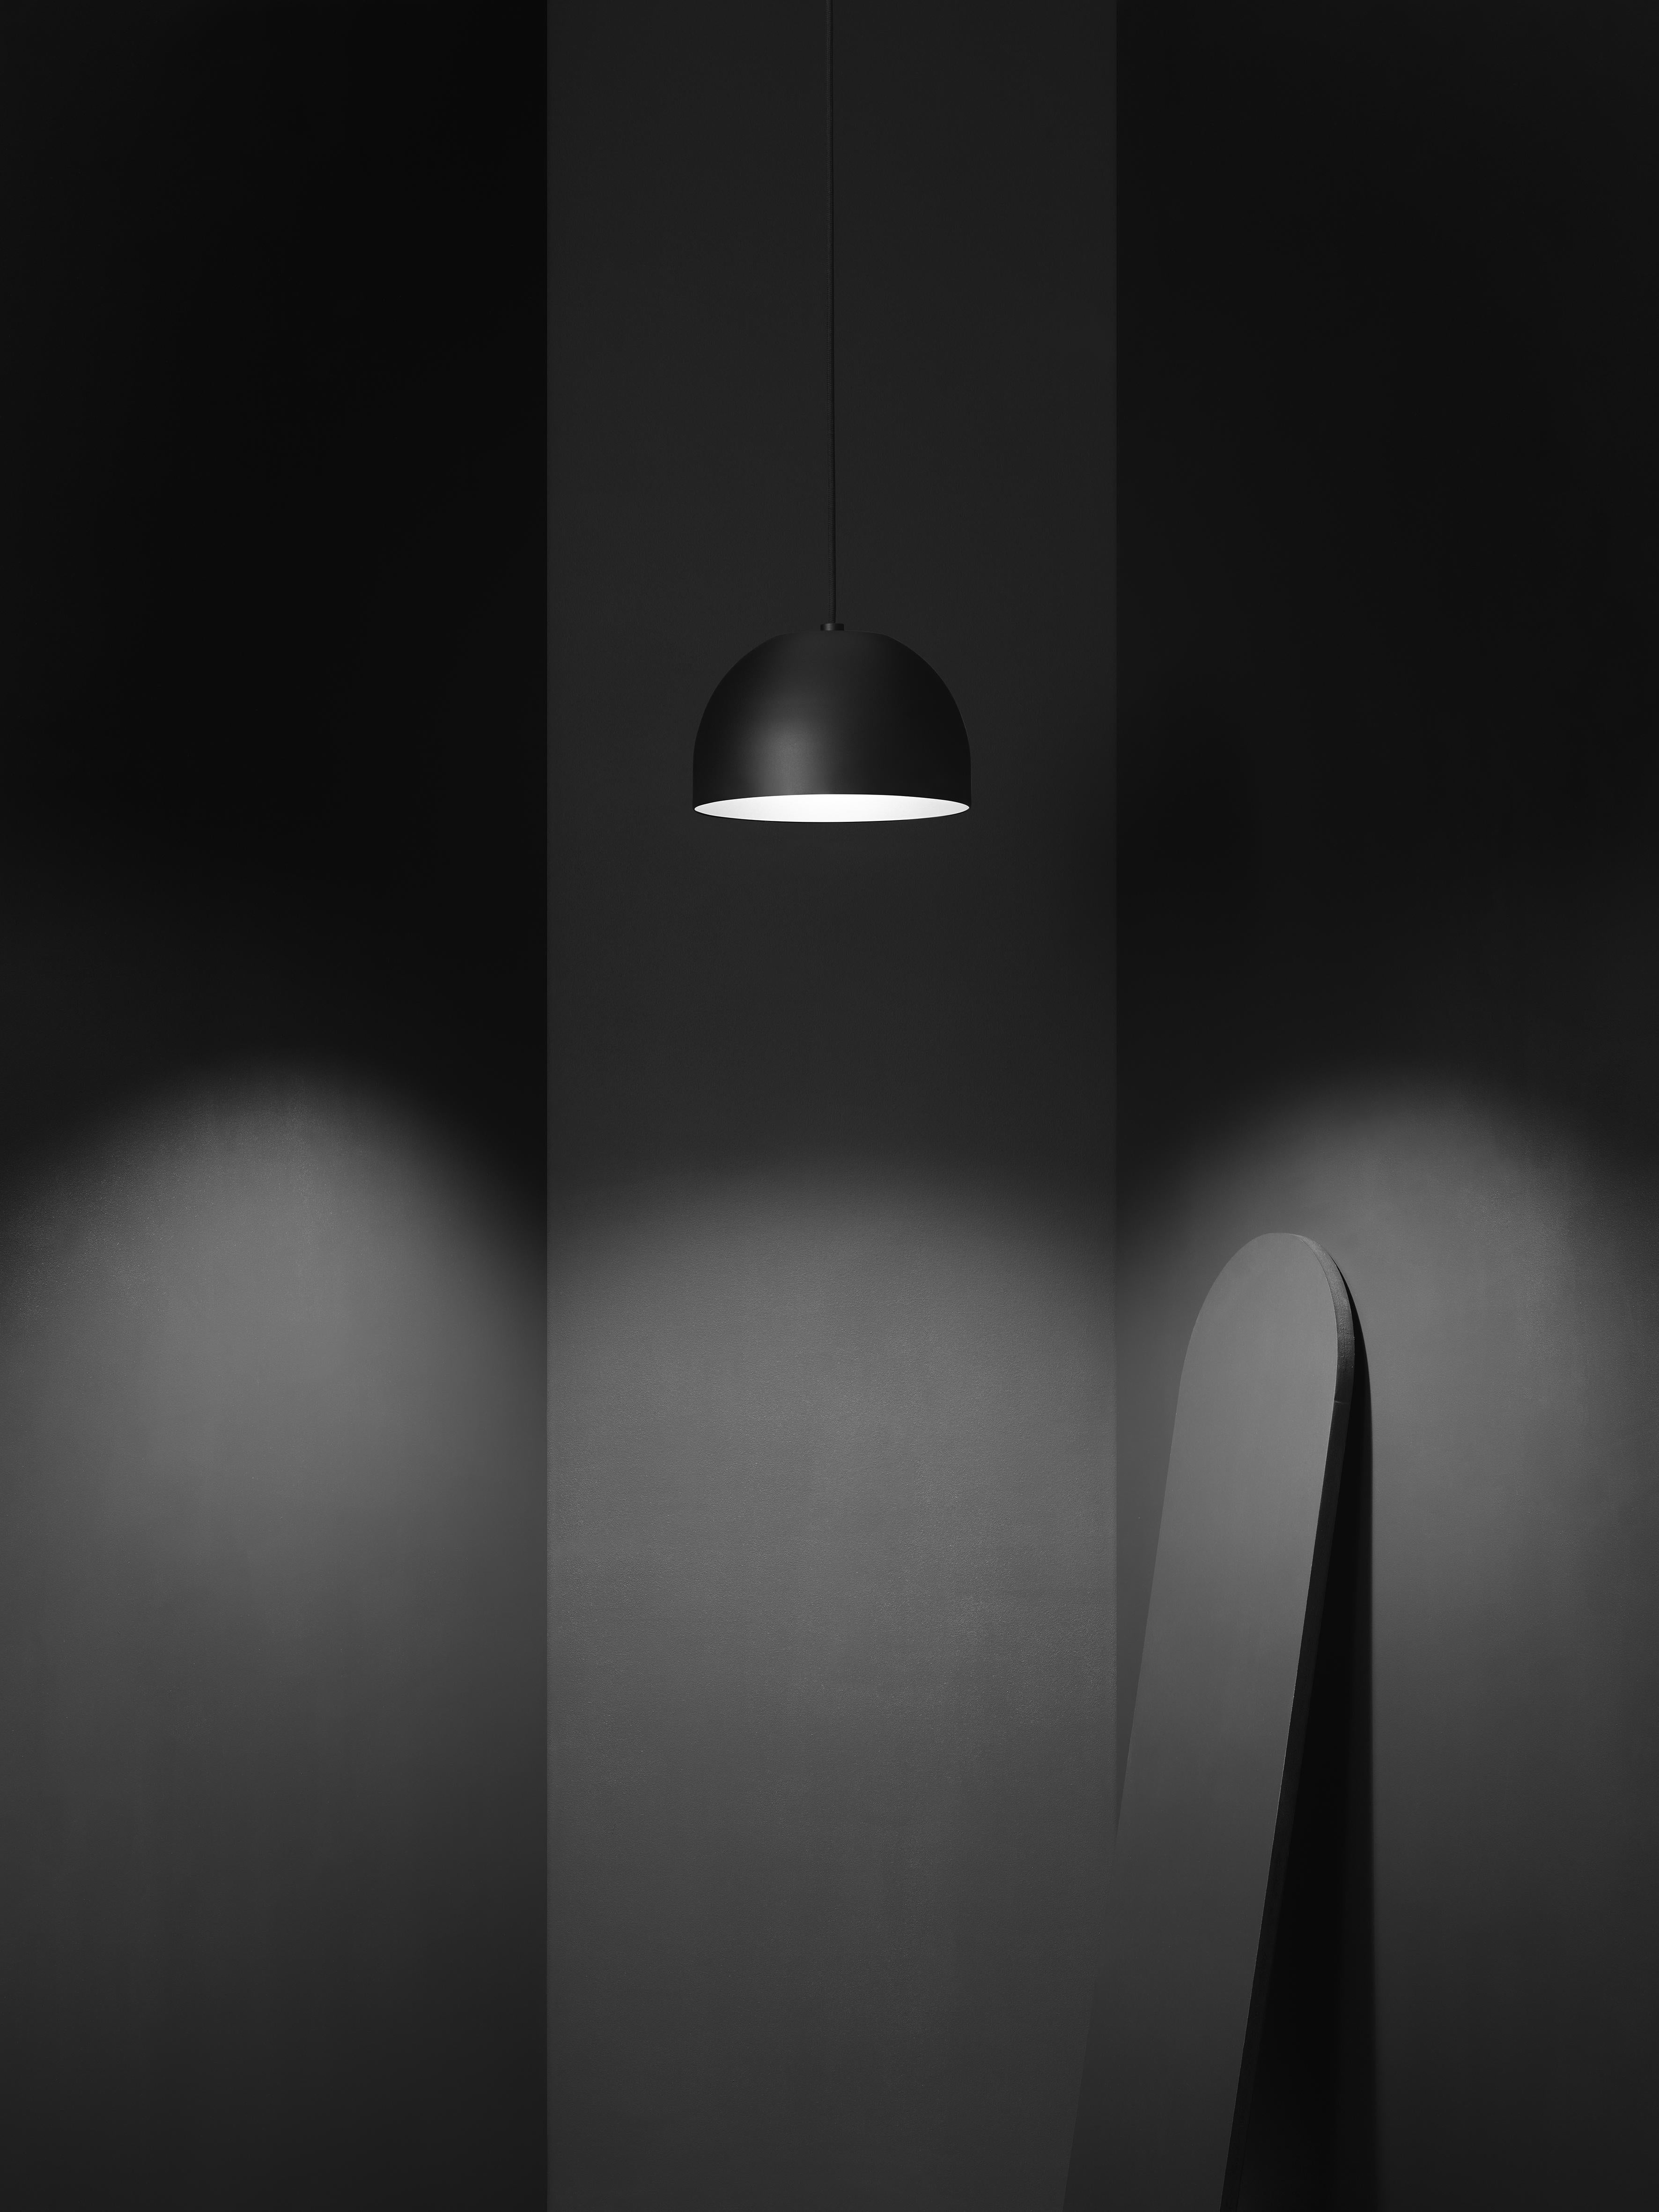 Zero Lighting brings the Bob pendant into being in collaboration with Bernstrand & Borselius, a design firm renowned for making interesting light fixtures for modern interiors. This pendant illustrates Zero’s skill at creating a machined artistry